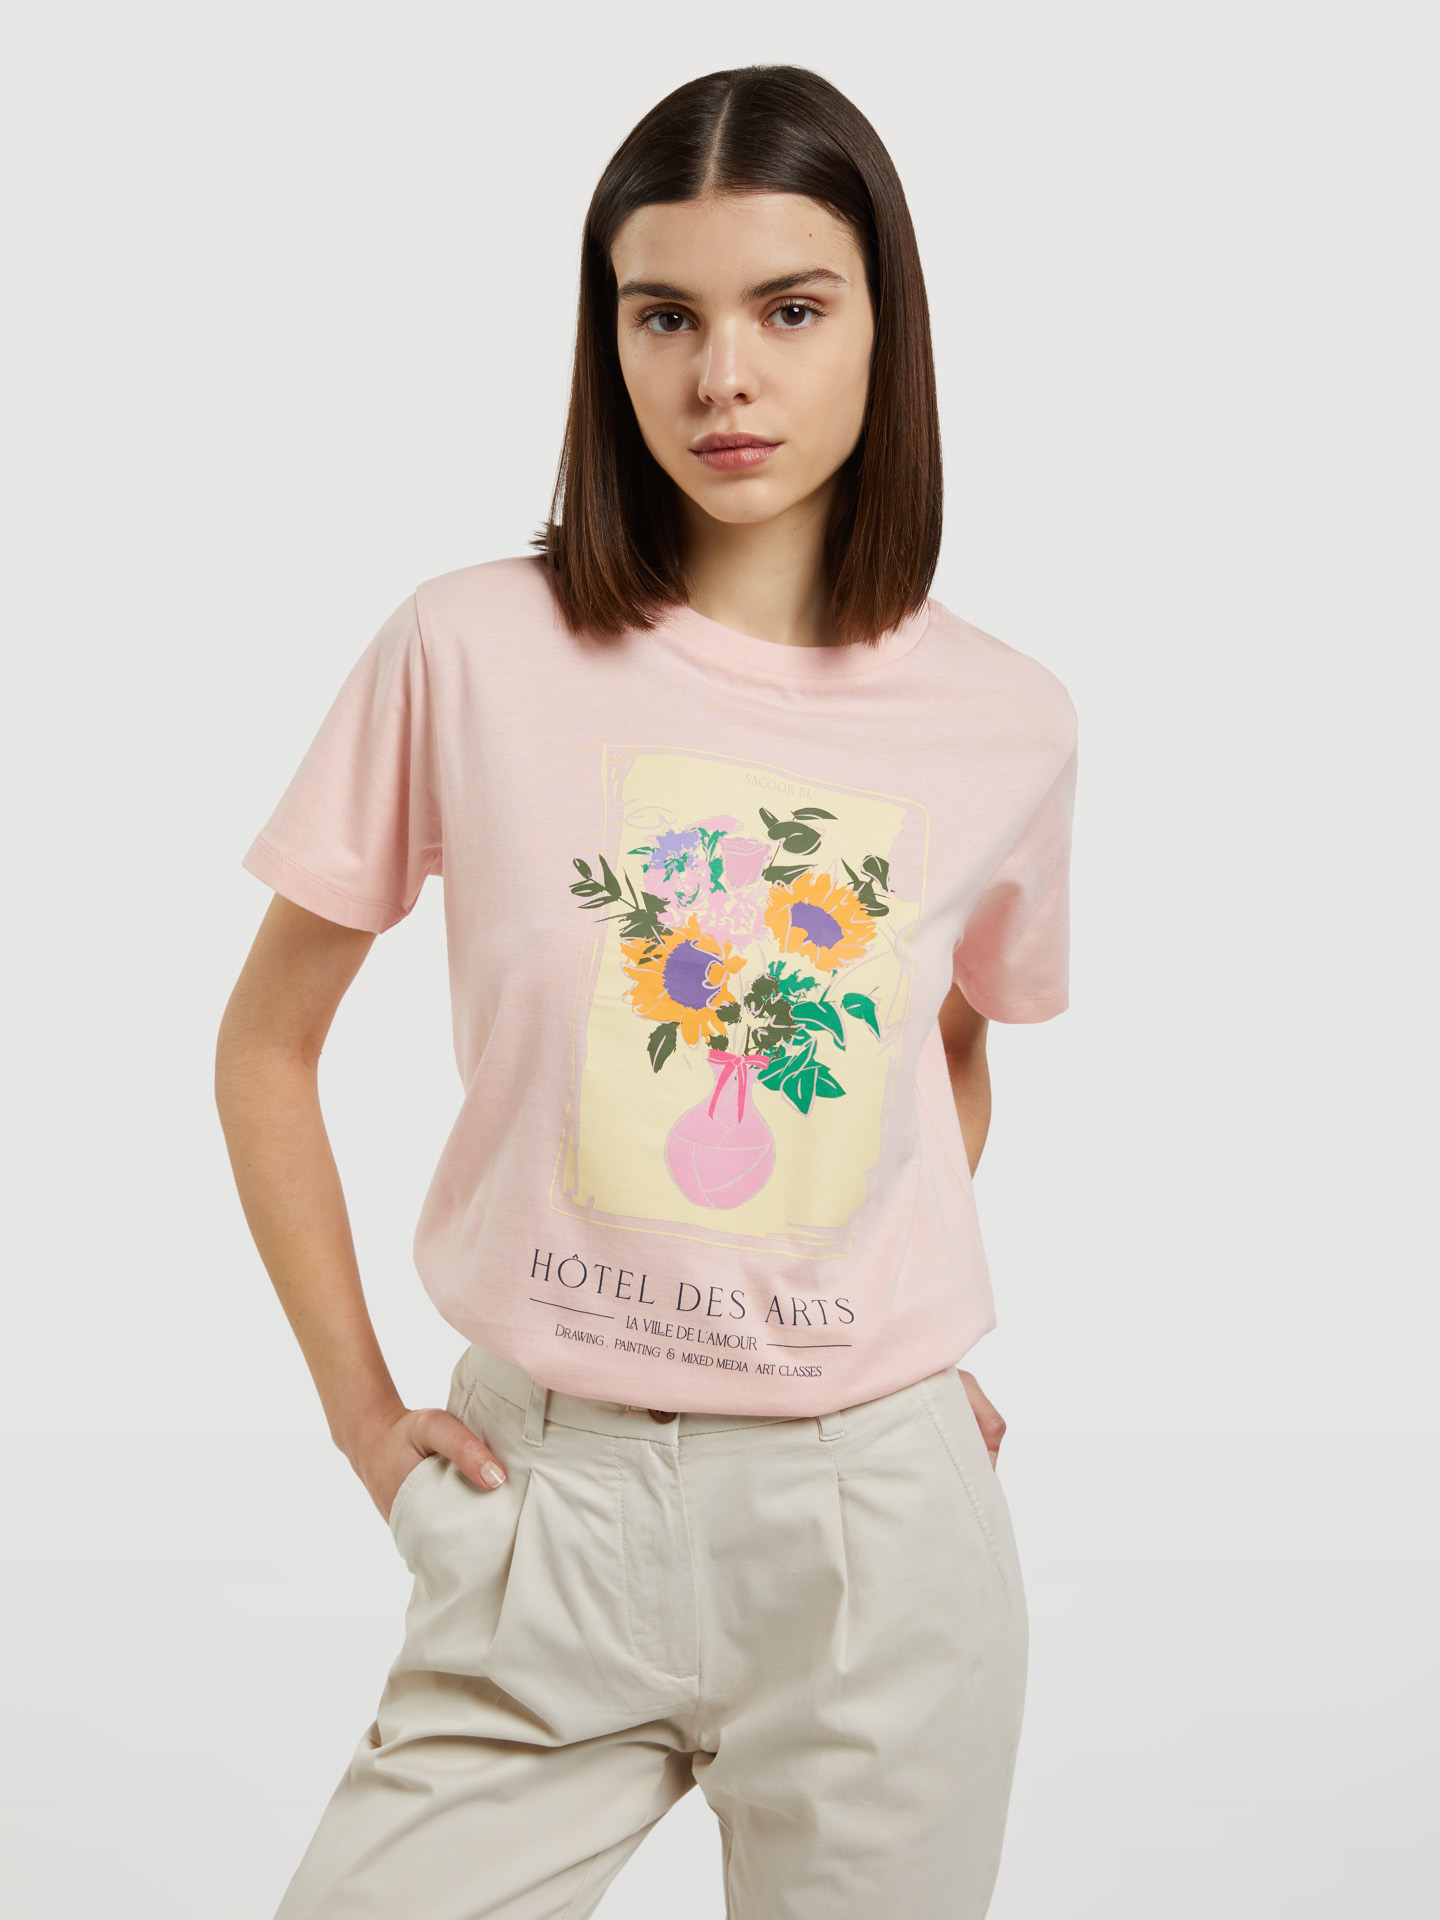 T-Shirt Pale Pink Casual Woman